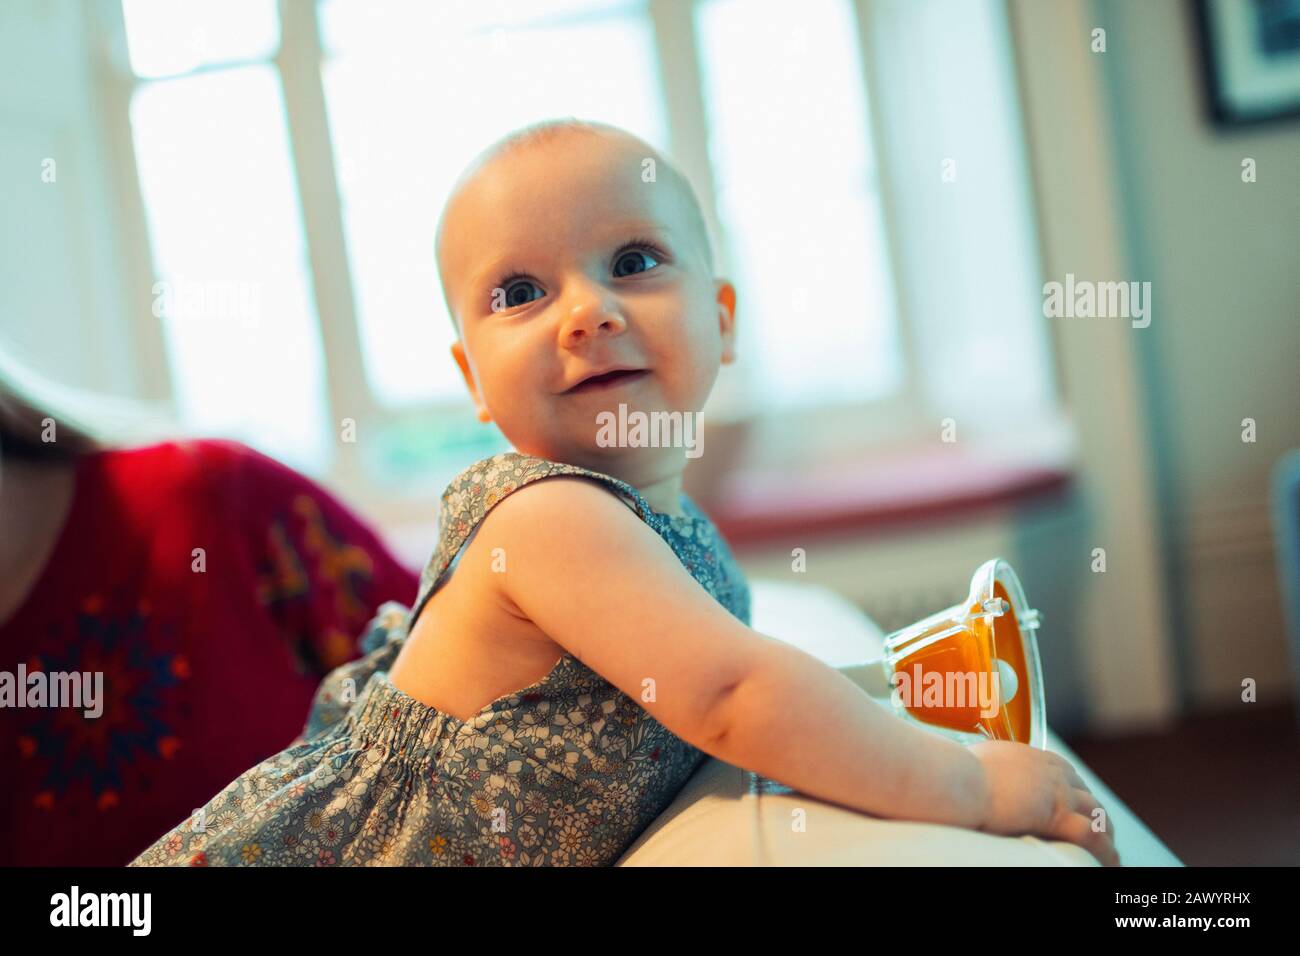 Cute baby girl looking over shoulder Stock Photo